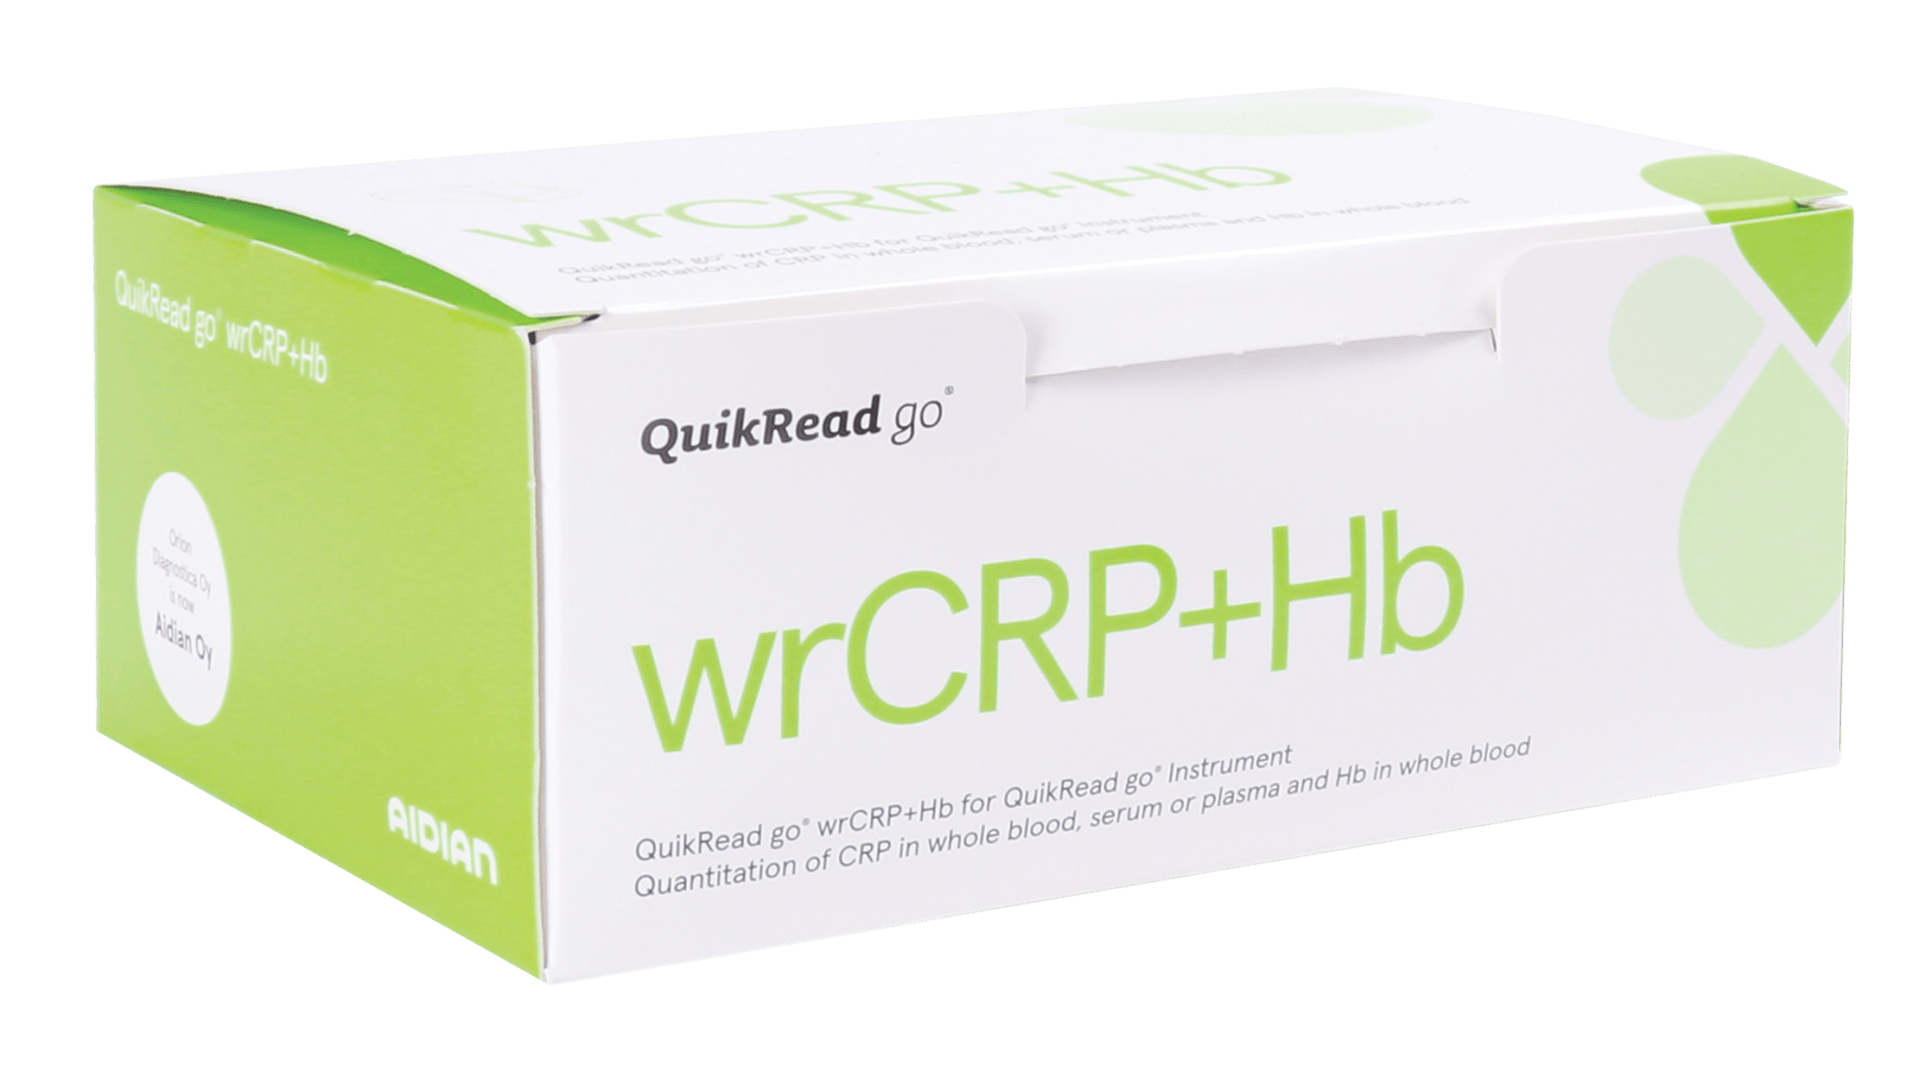 QuikRead go wrCRP+Hb tests